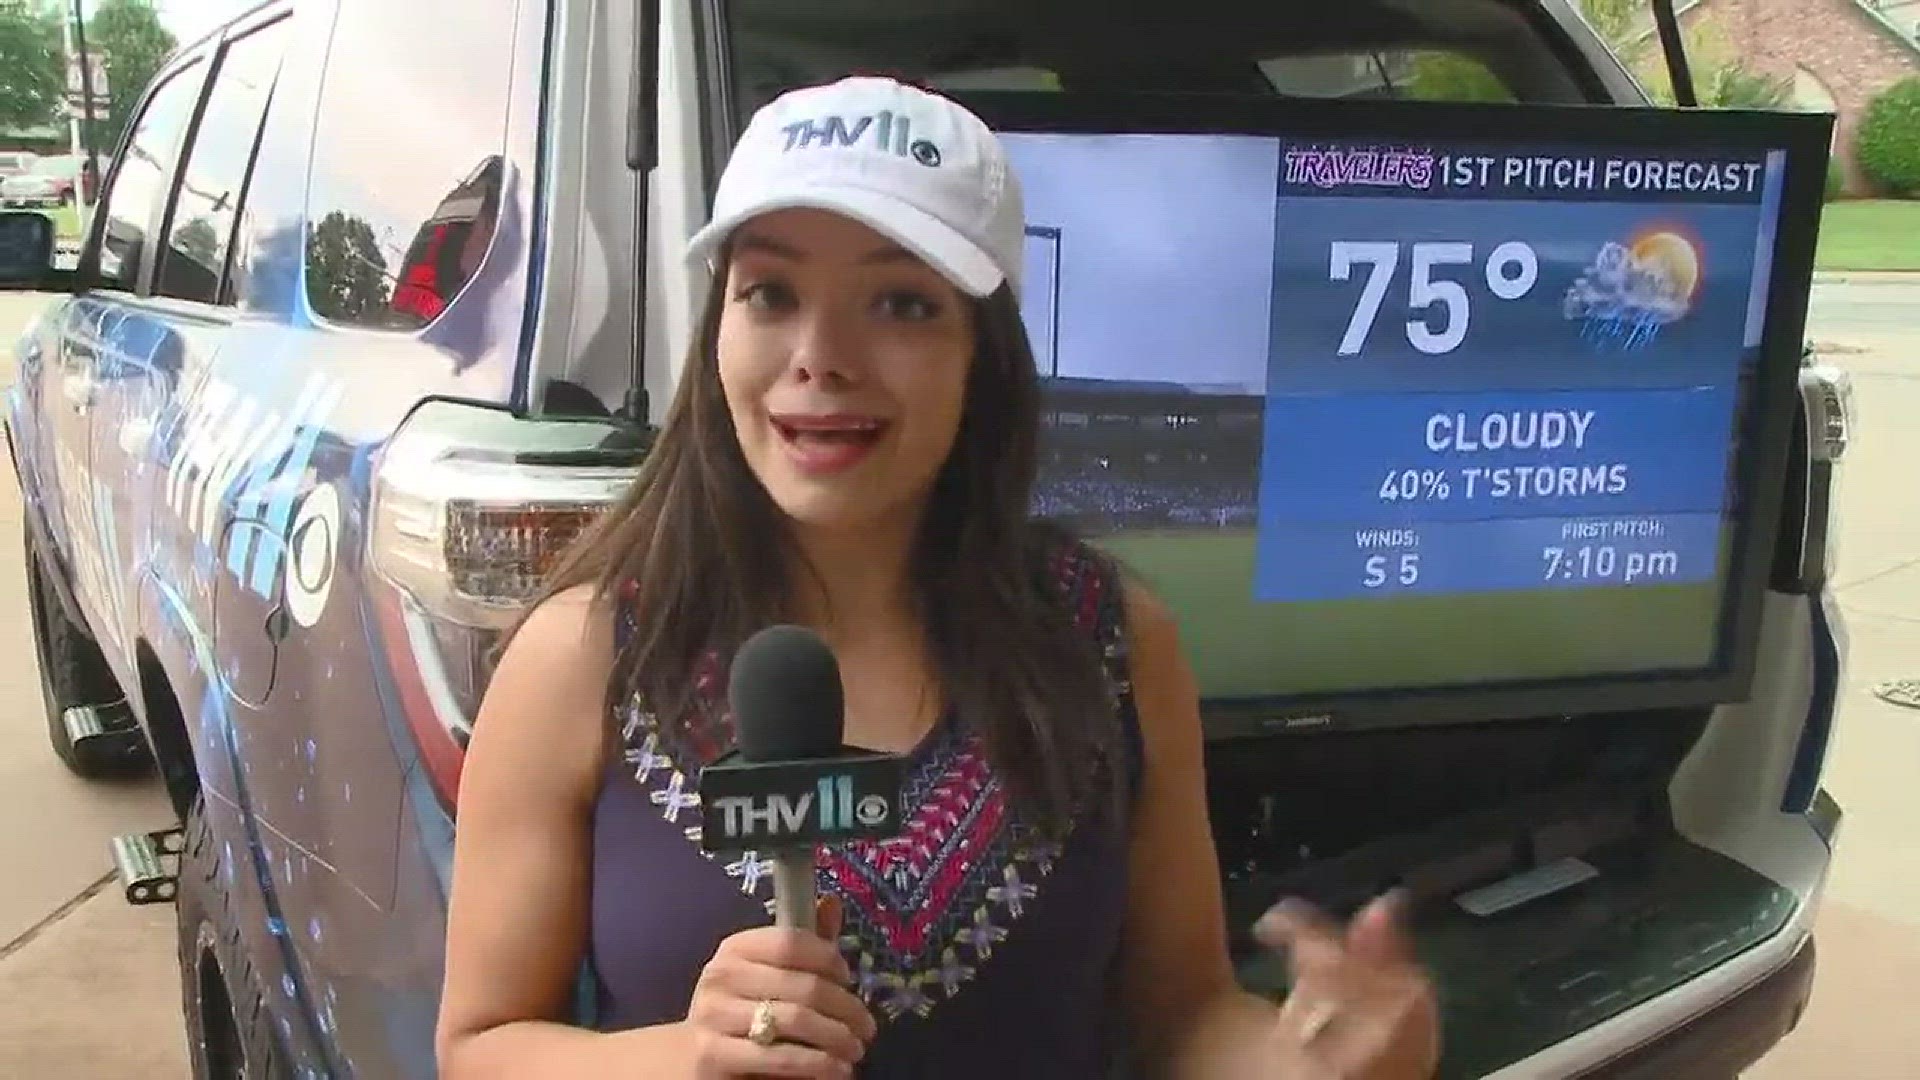 Meteorologist Mariel Ruiz talks about WxForce11 at the Arkansas Travelers game, the Travs forecast and the upcoming THV11 night at the Travs.